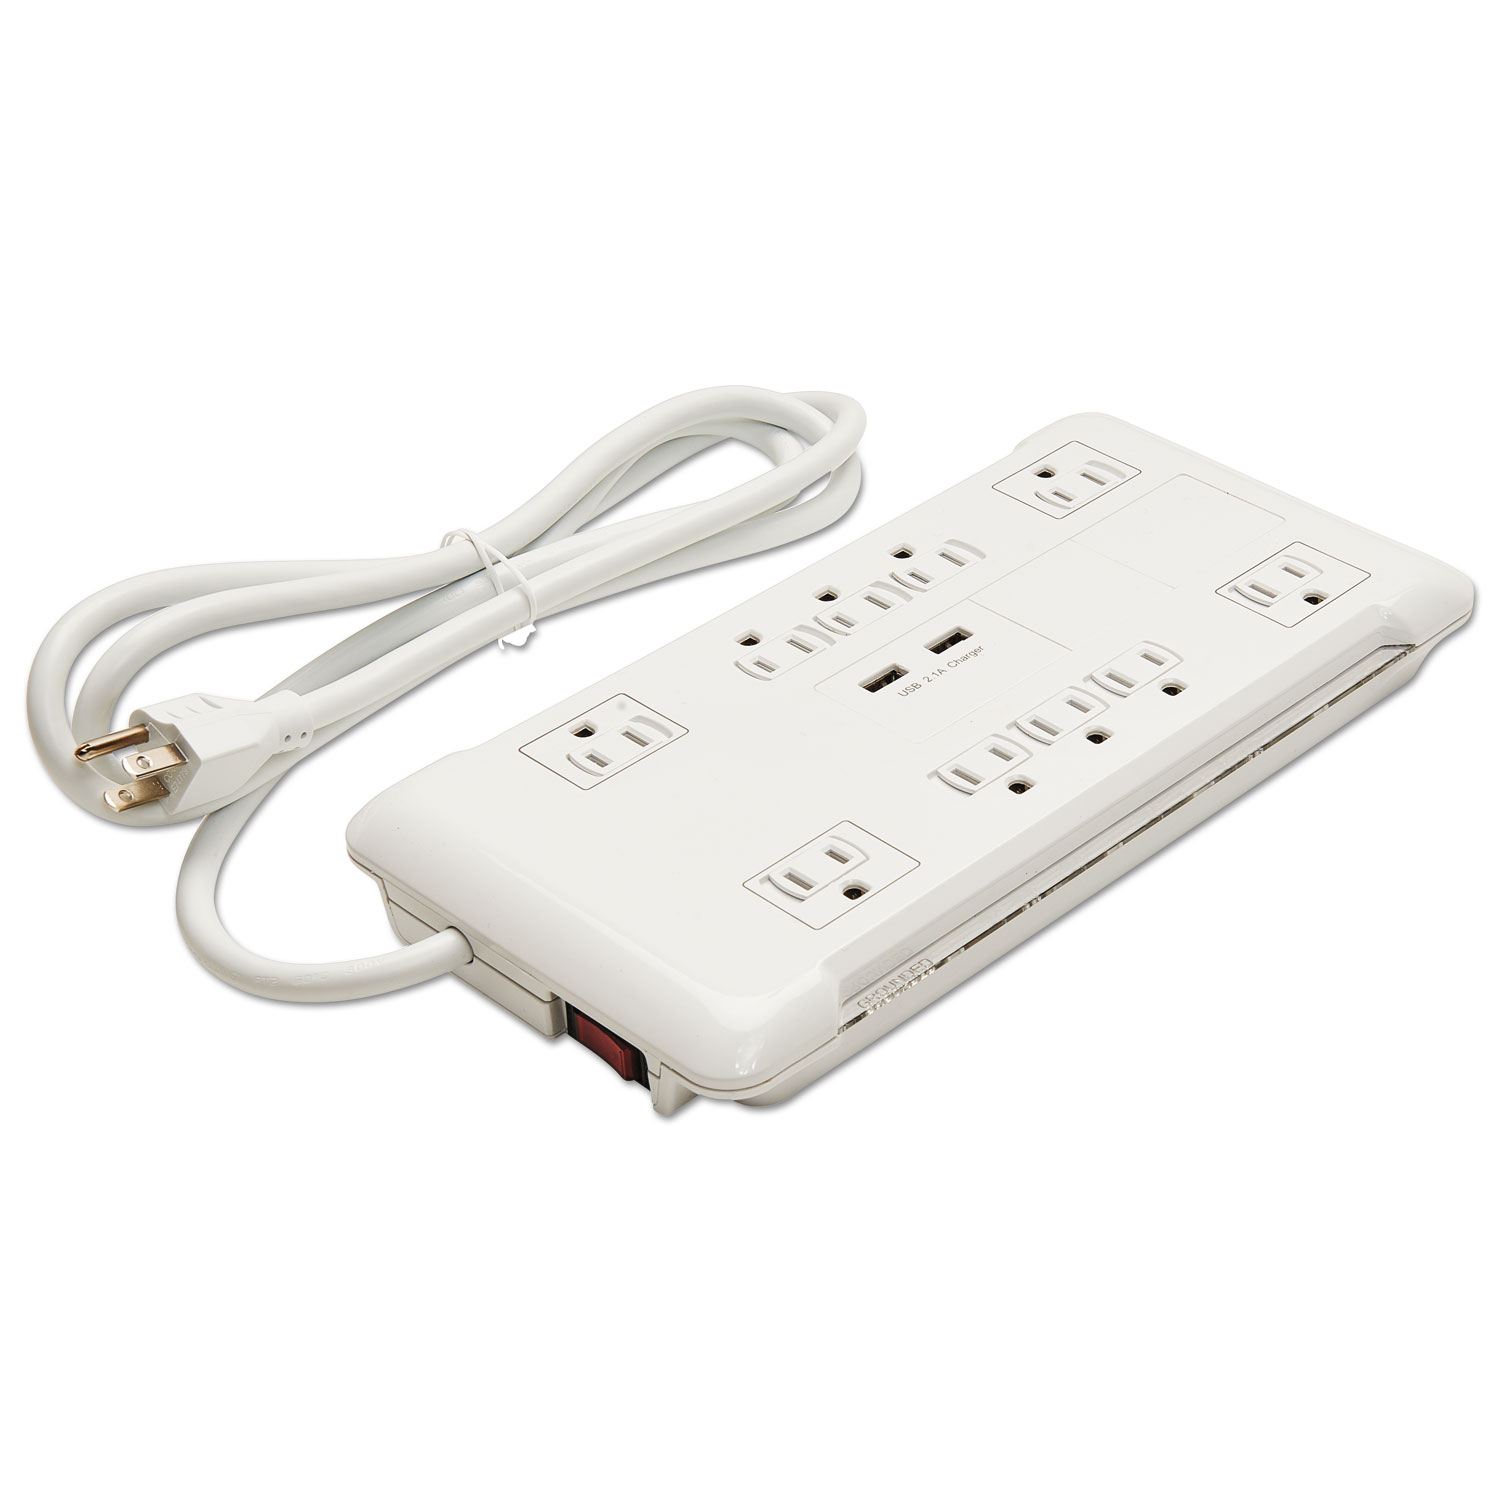  Innovera IVR71670 Slim Surge Protector, 10 Outlets/2 USB Charging Ports, 6 ft Cord, 2880 J, White (IVR71670) 